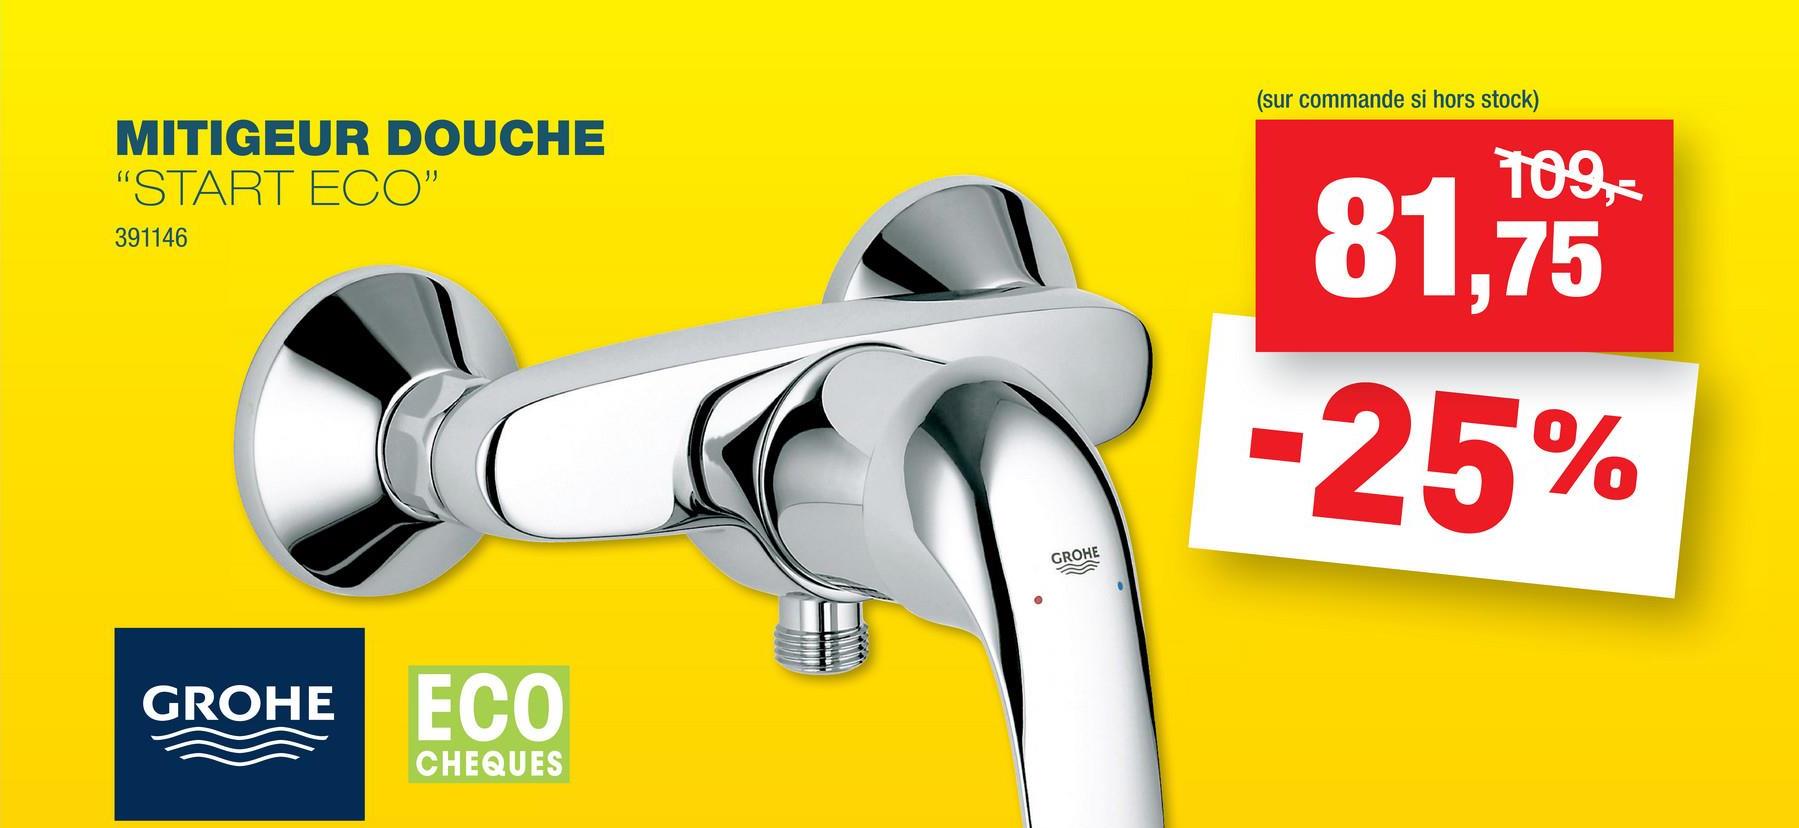 MITIGEUR DOUCHE
"START ECO"
391146
GROHE ECO
CHEQUES
GROHE
(sur commande si hors stock)
109,-
81,75
-25%